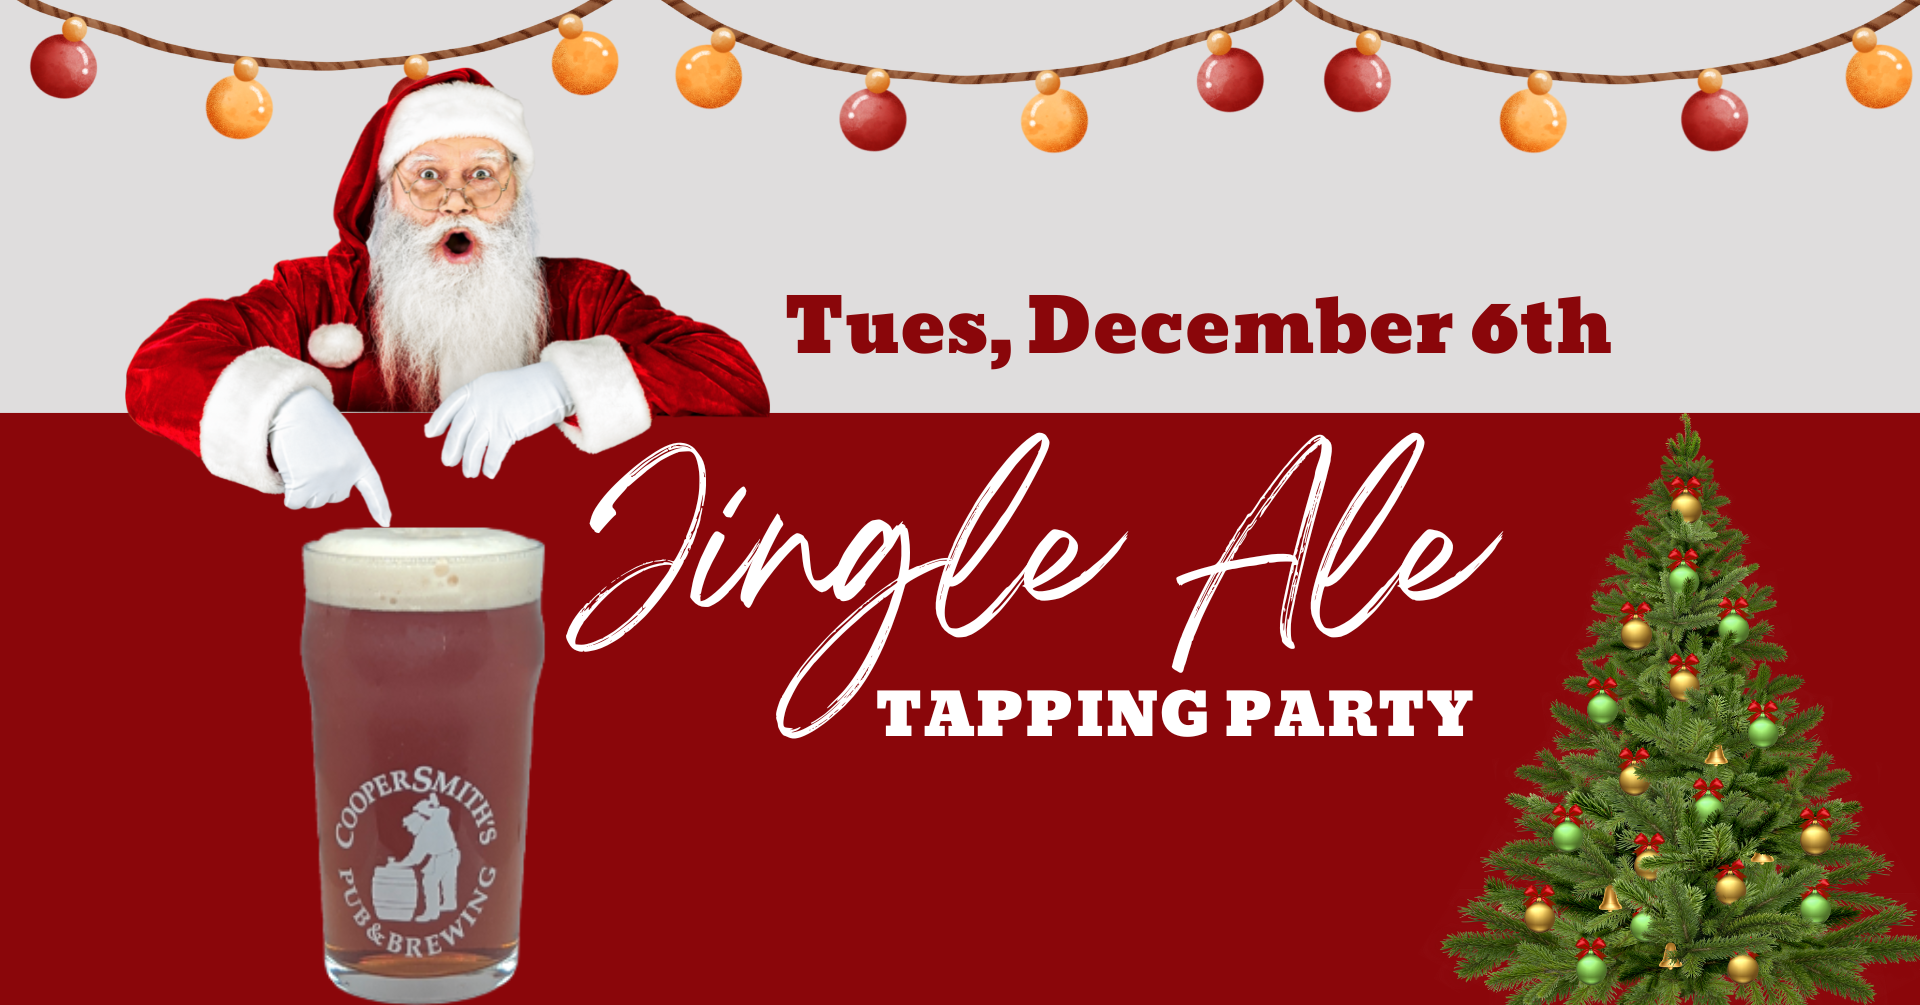 Jingle Ale Tapping Party Dec 6